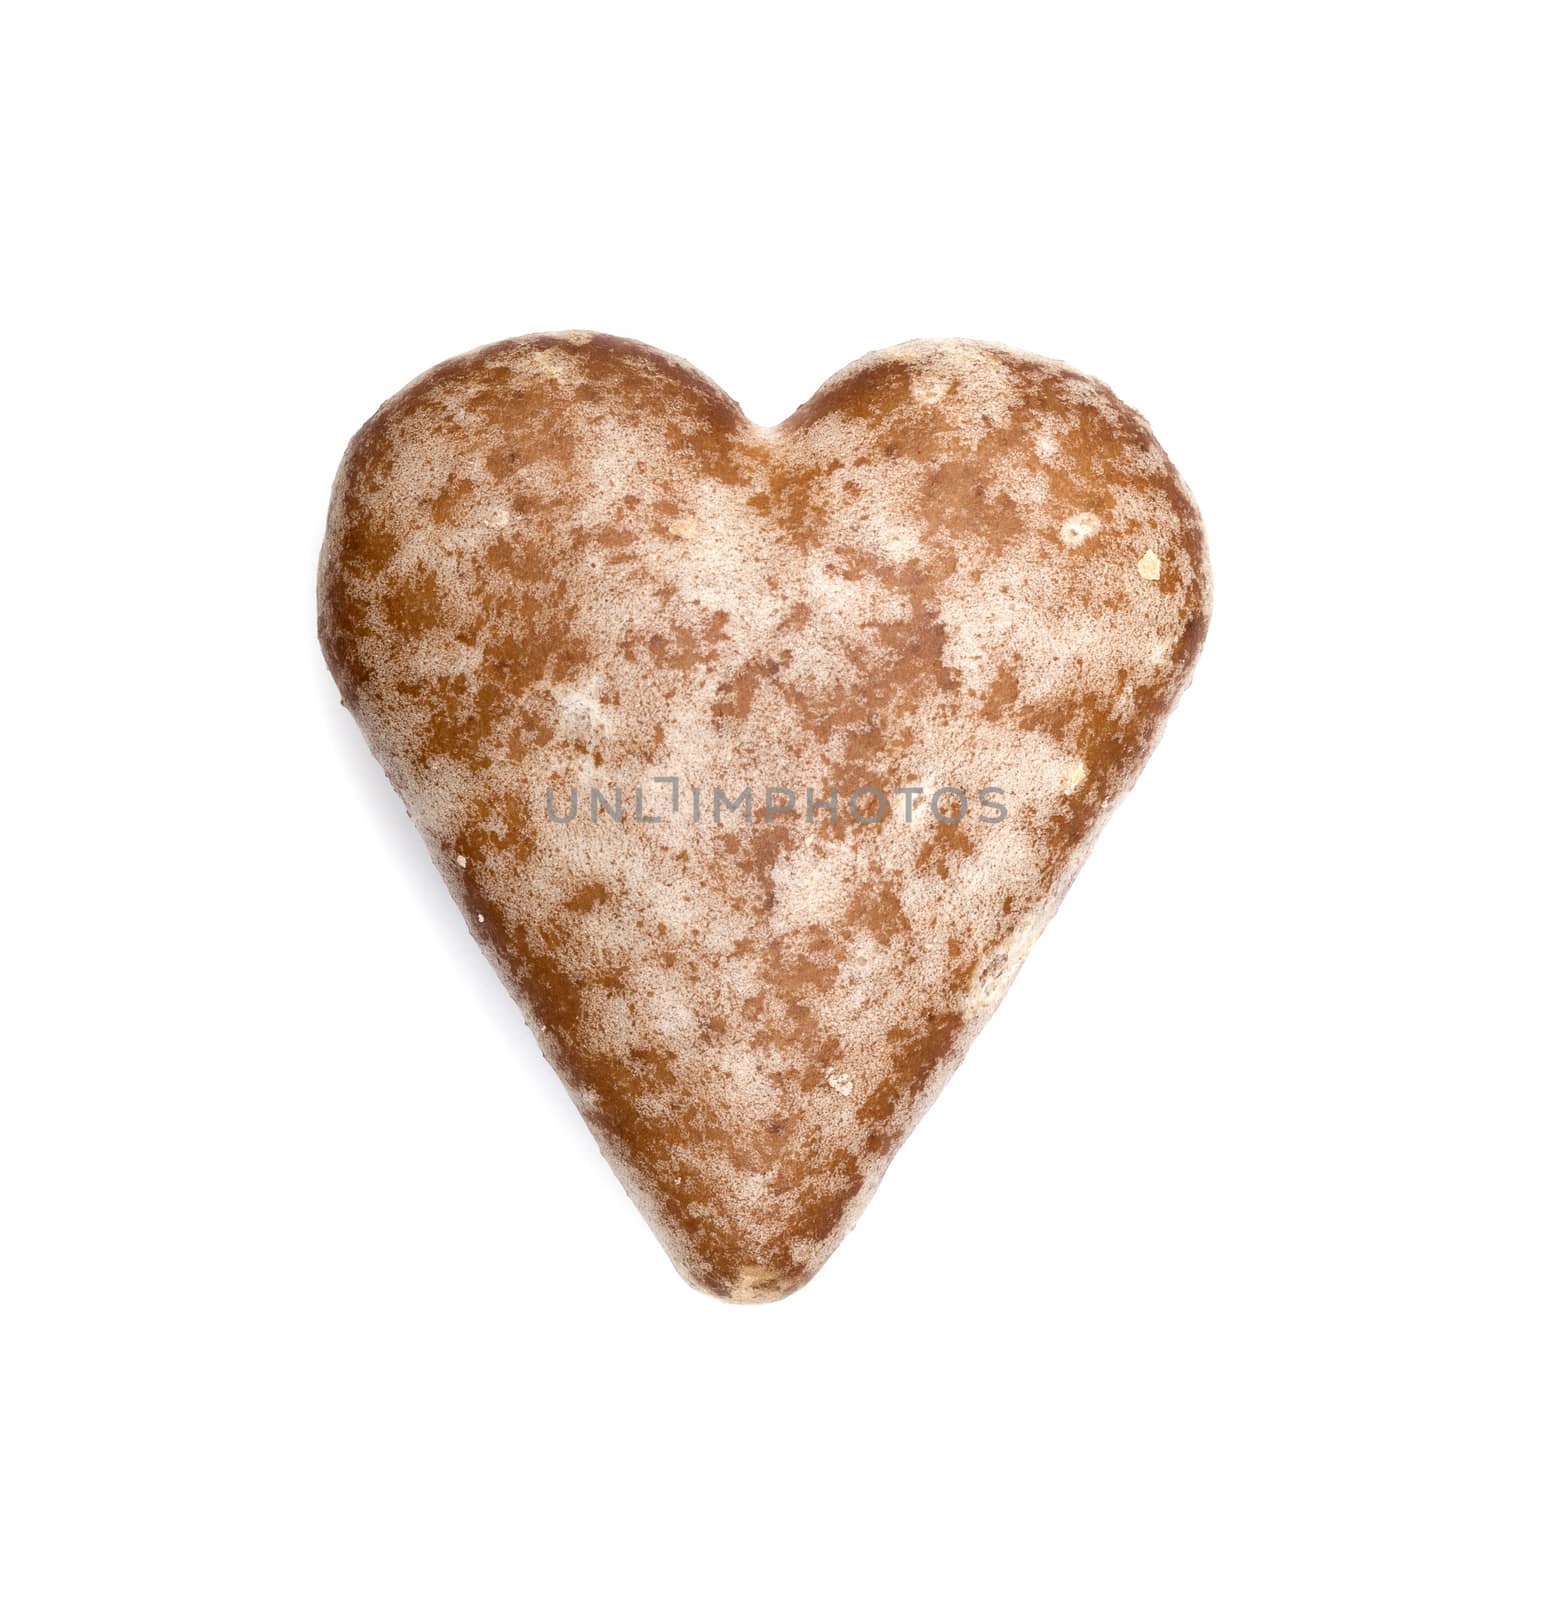 polish traditional gingerbread biscuit isolated on white by DNKSTUDIO